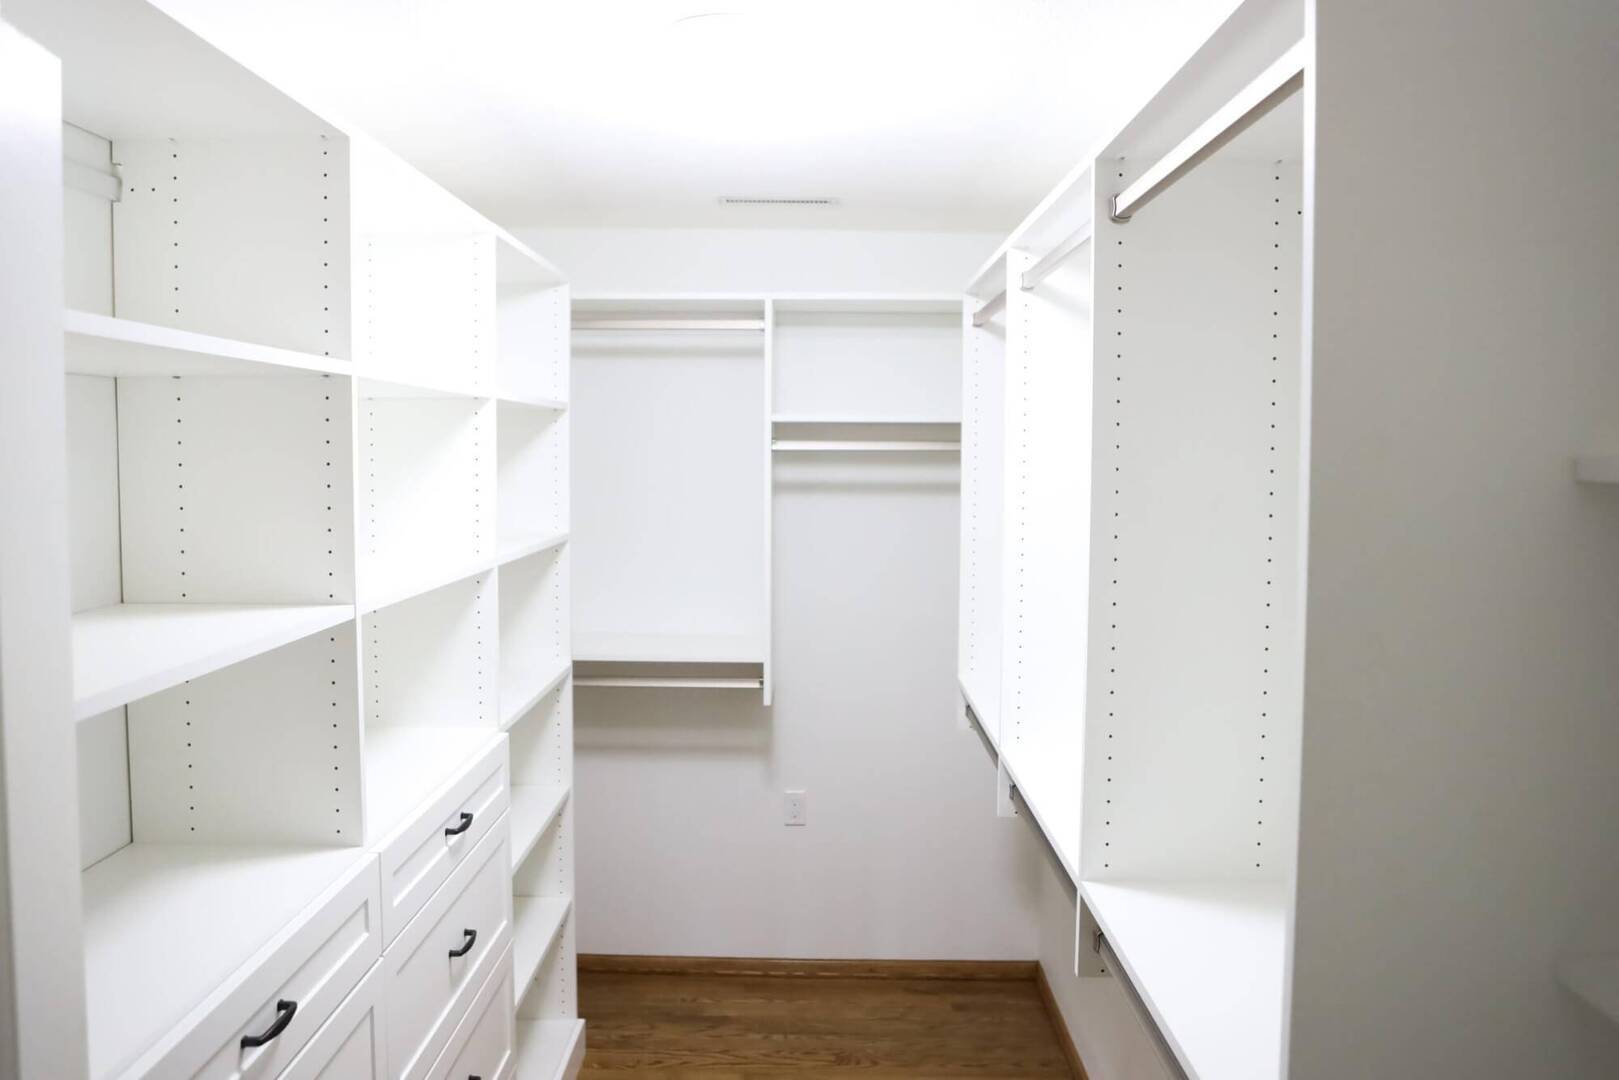 looking into closet of built in white shelving units and cabinets on all three walls